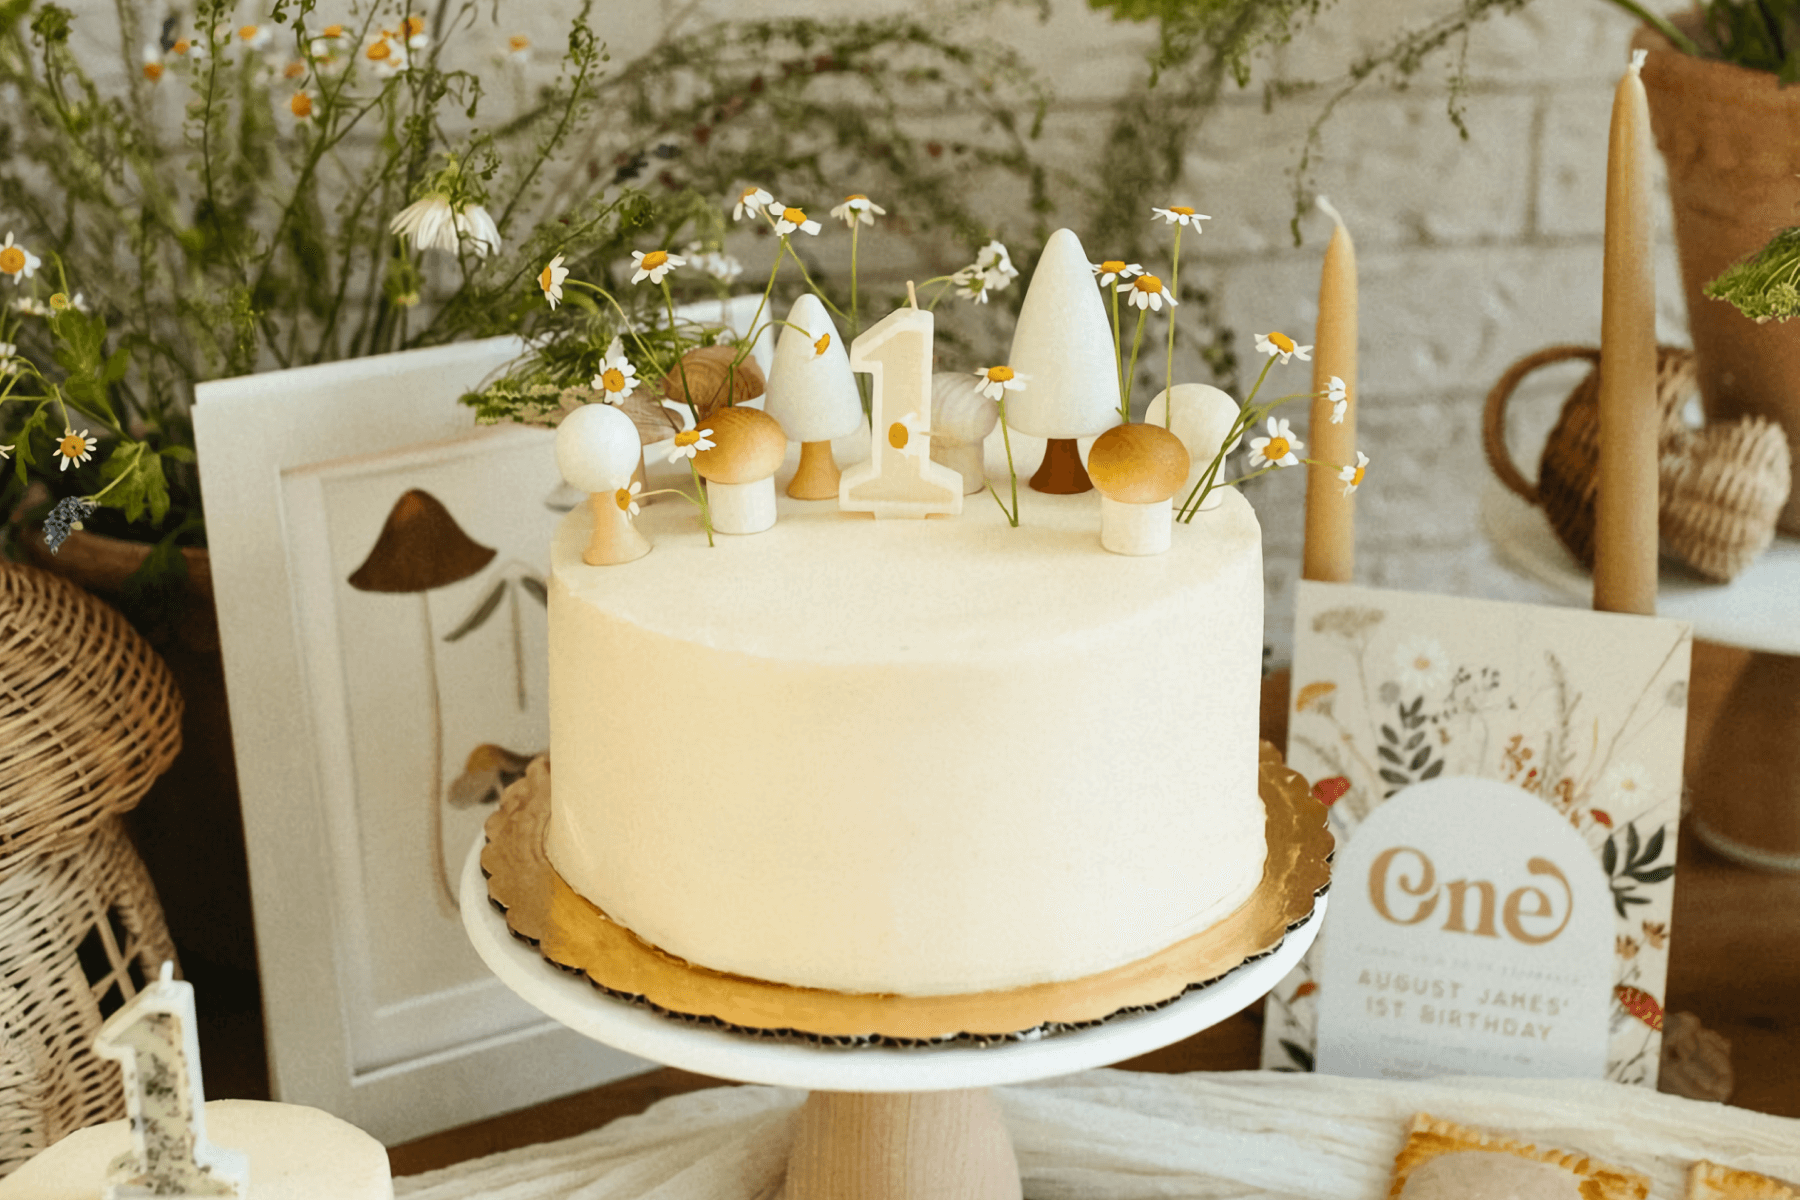 A white layer cake on a crowded table is decorated with mushrooms, chamomile flowers, and a white “1” candle.